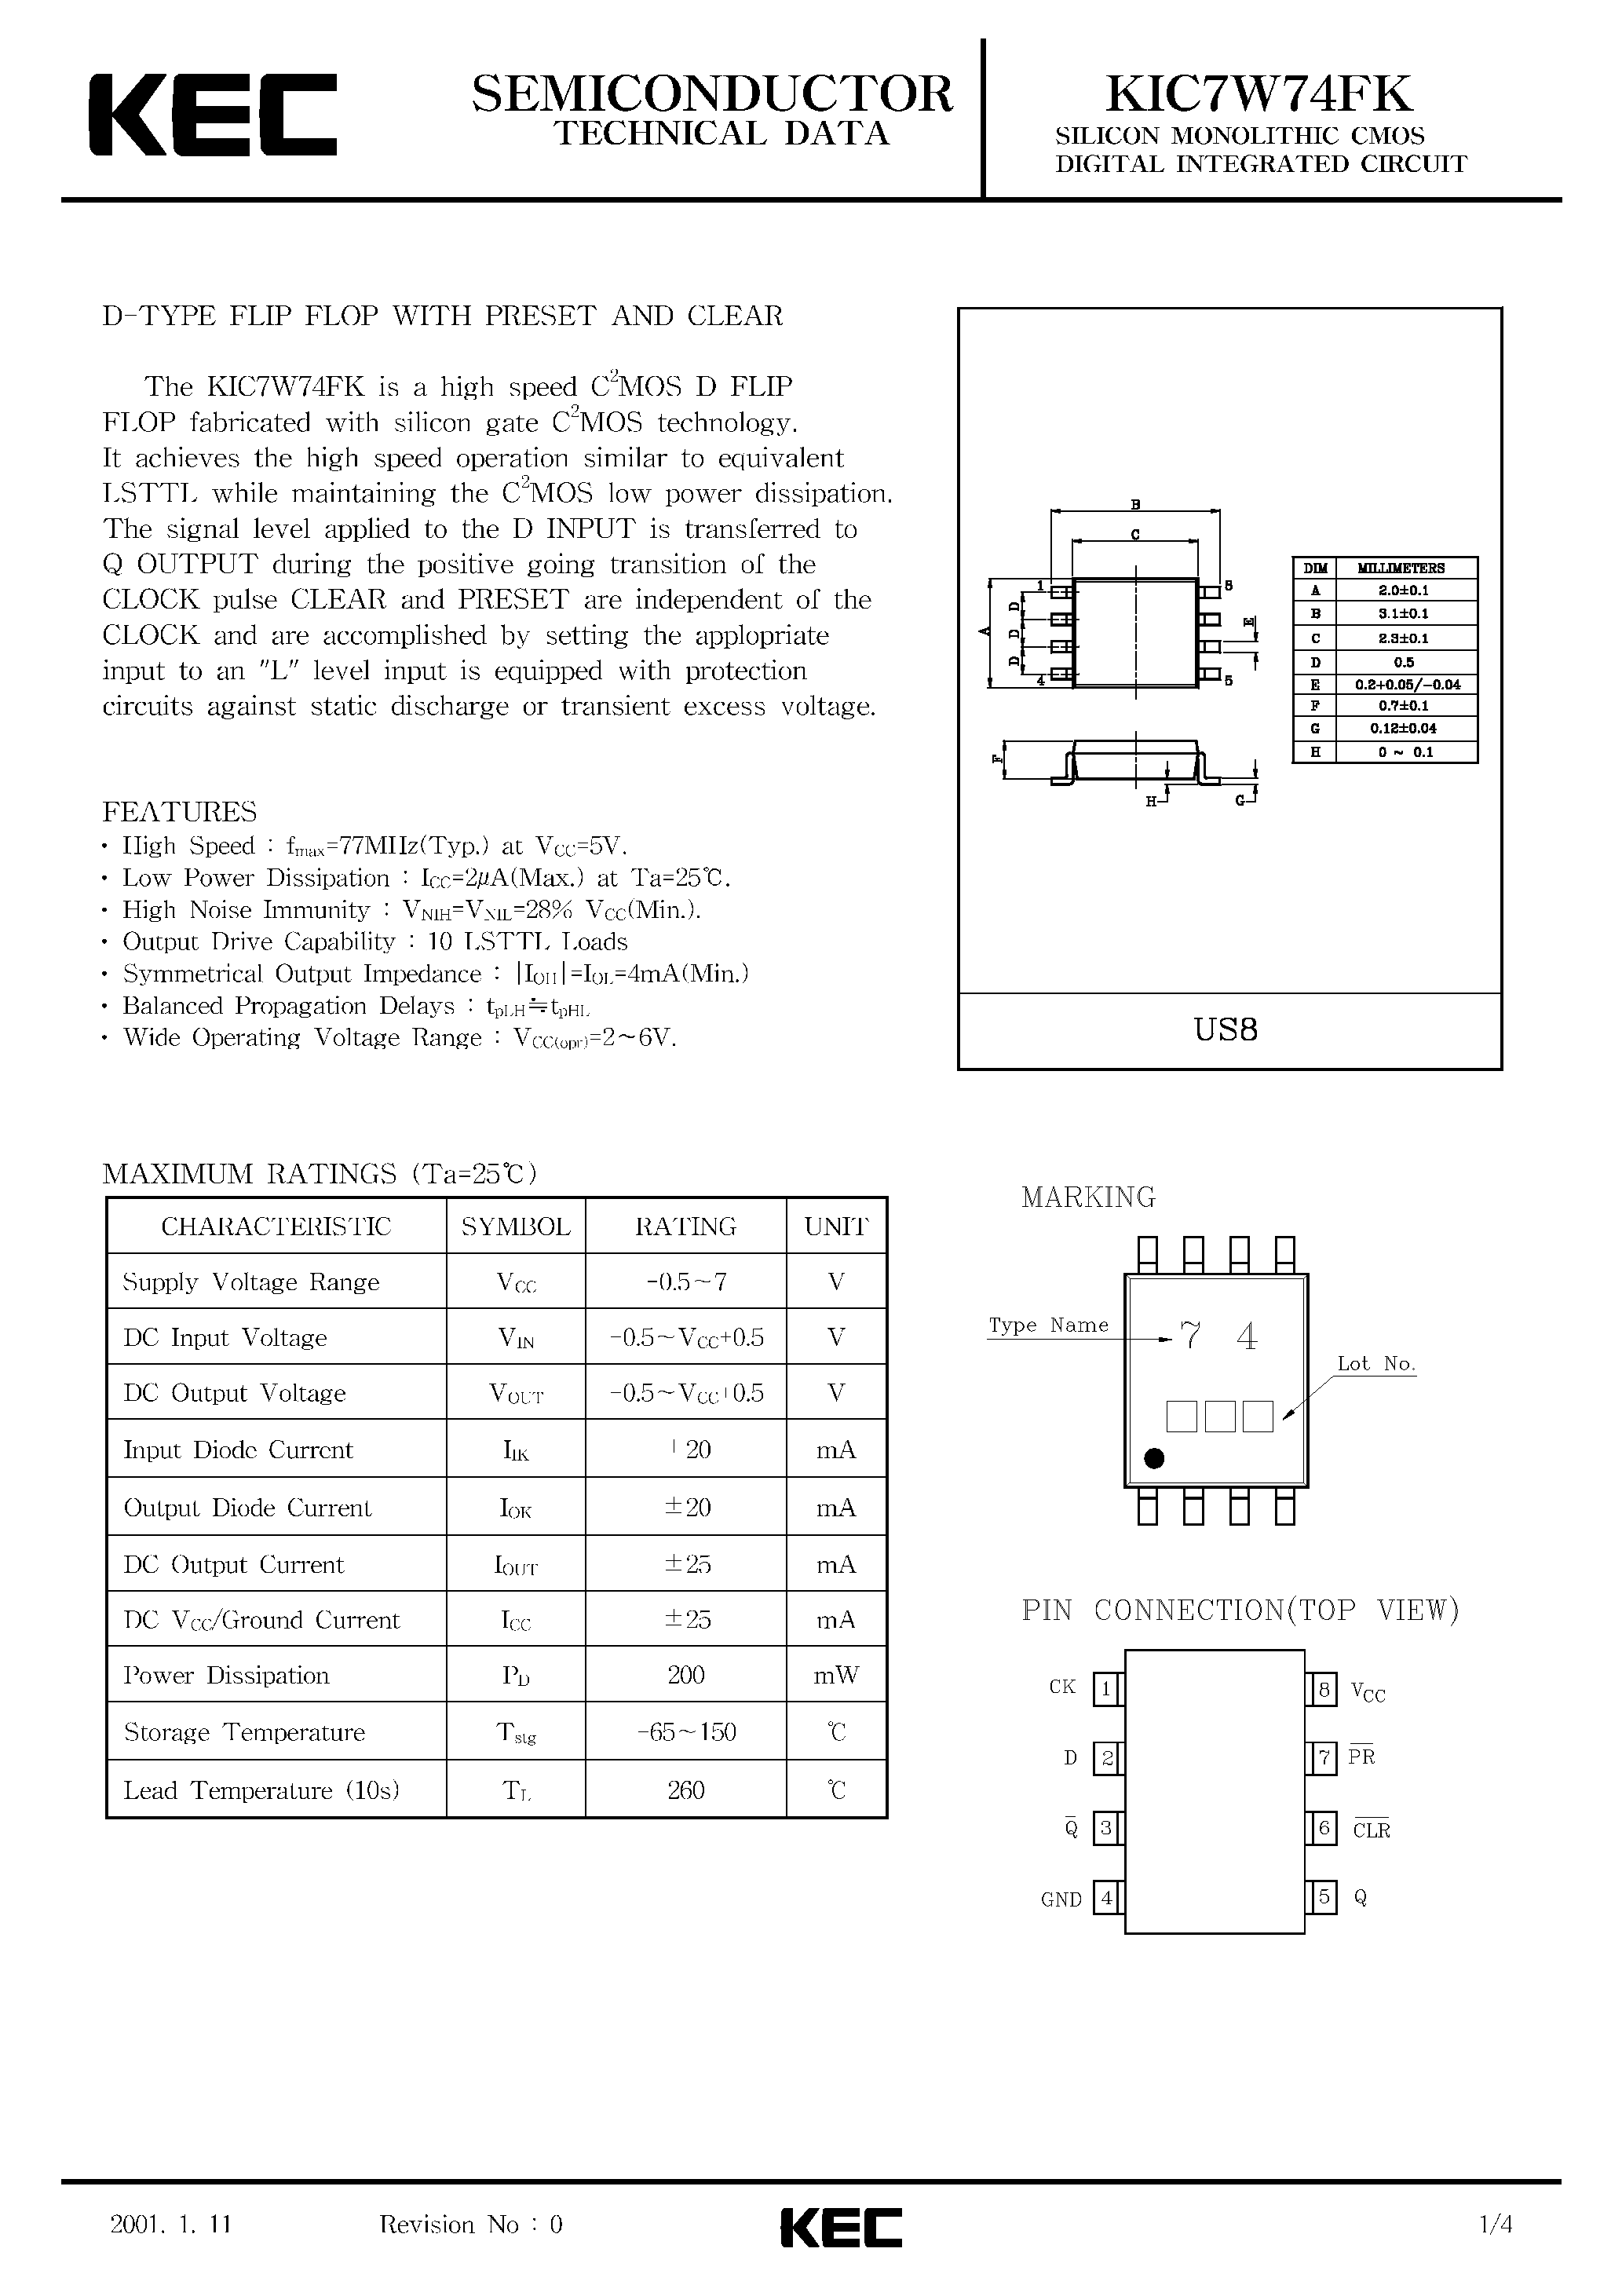 Datasheet KIC7W74FK - SILICON MONOLITHIC CMOS DIGITAL INTEGRATED CIRCUIT(D-TYPE FLIP FLOP WITH PRESET AND CLEAR) page 1